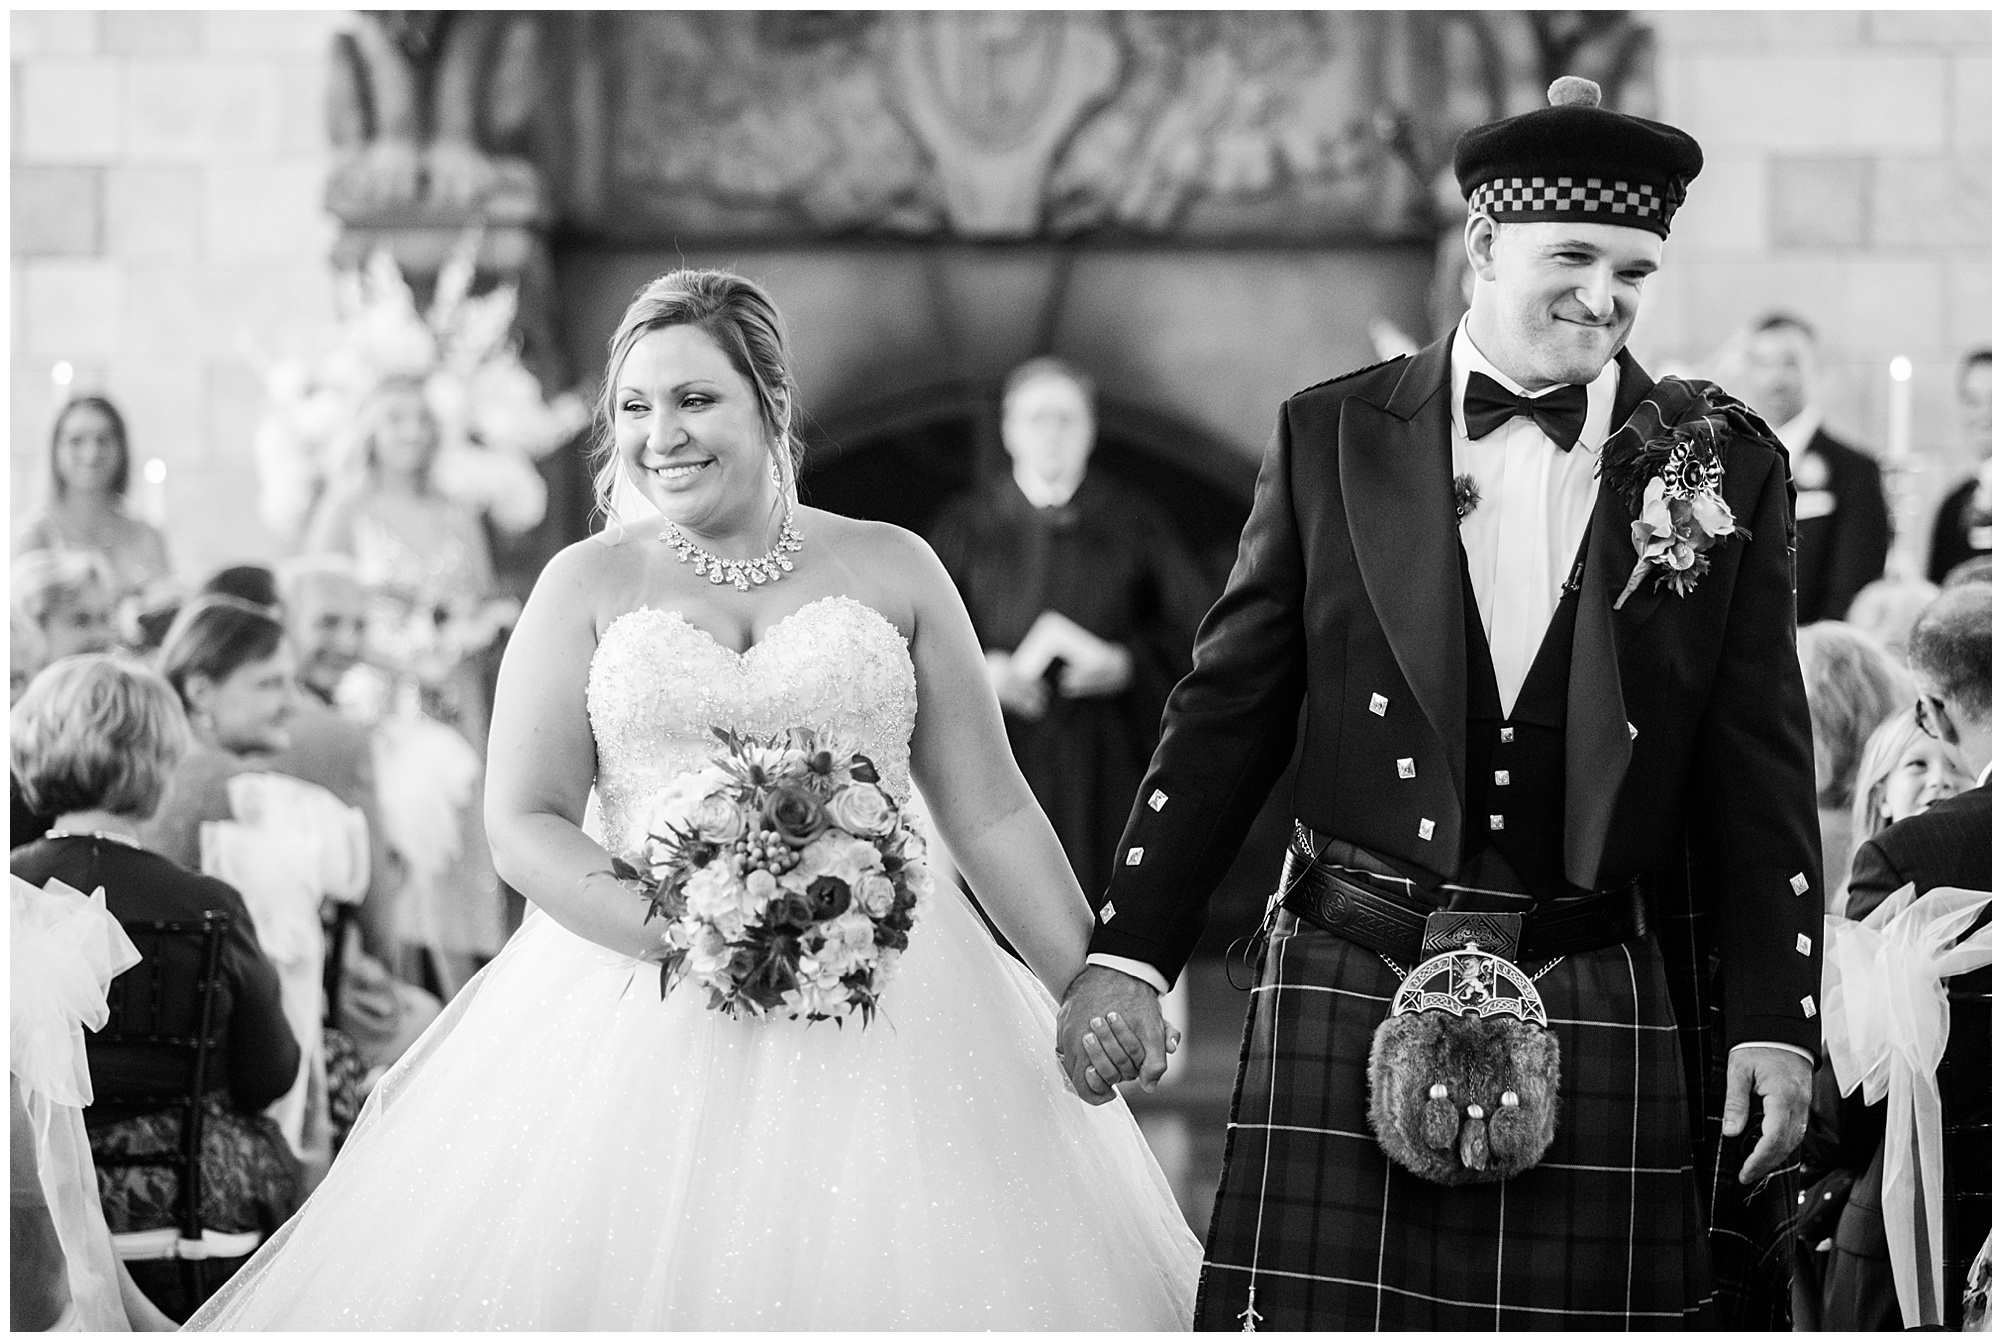 just married photo. bride and groom holding hands and walking down the aisle. groom is wearing kilt and tartan. bride is wearing princess cut ballgown wedding dress that is sparkly. dover hall estate ballroom venue is in the backdrop. by richmond wedding photographer, Sarah & Dave Photography